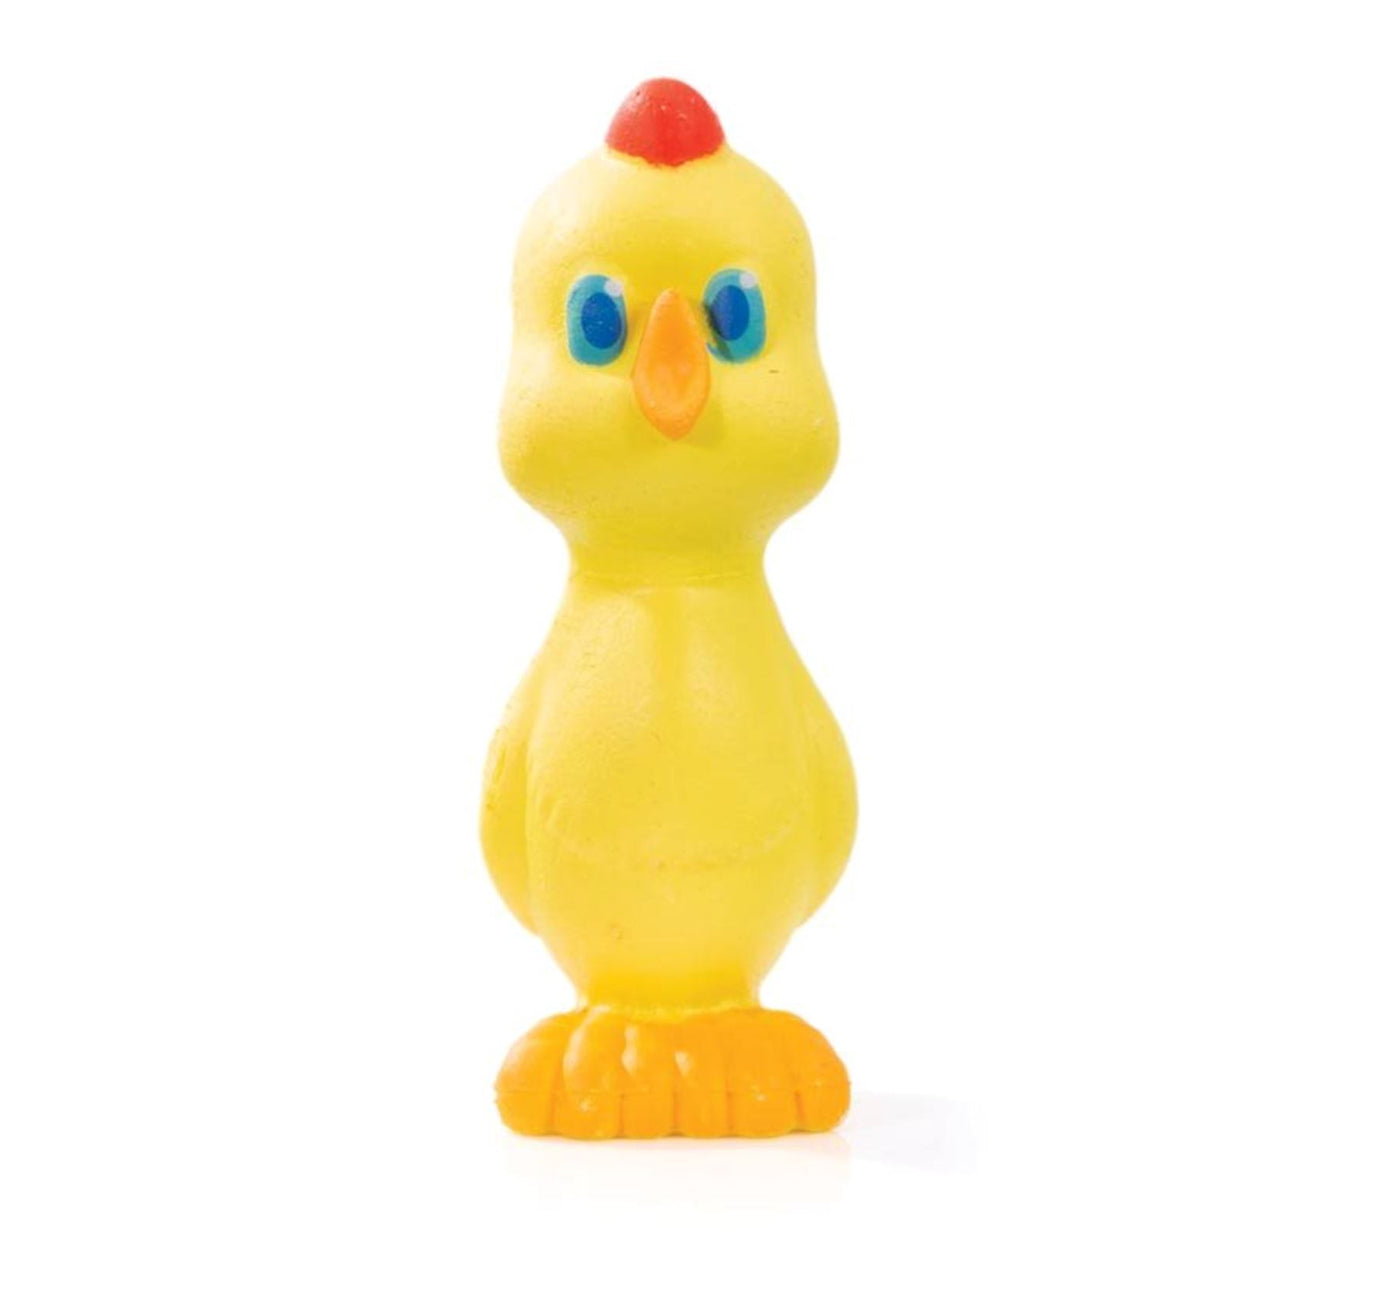 Hatch It - Chicks & Bunnies Toy IS Gifts 